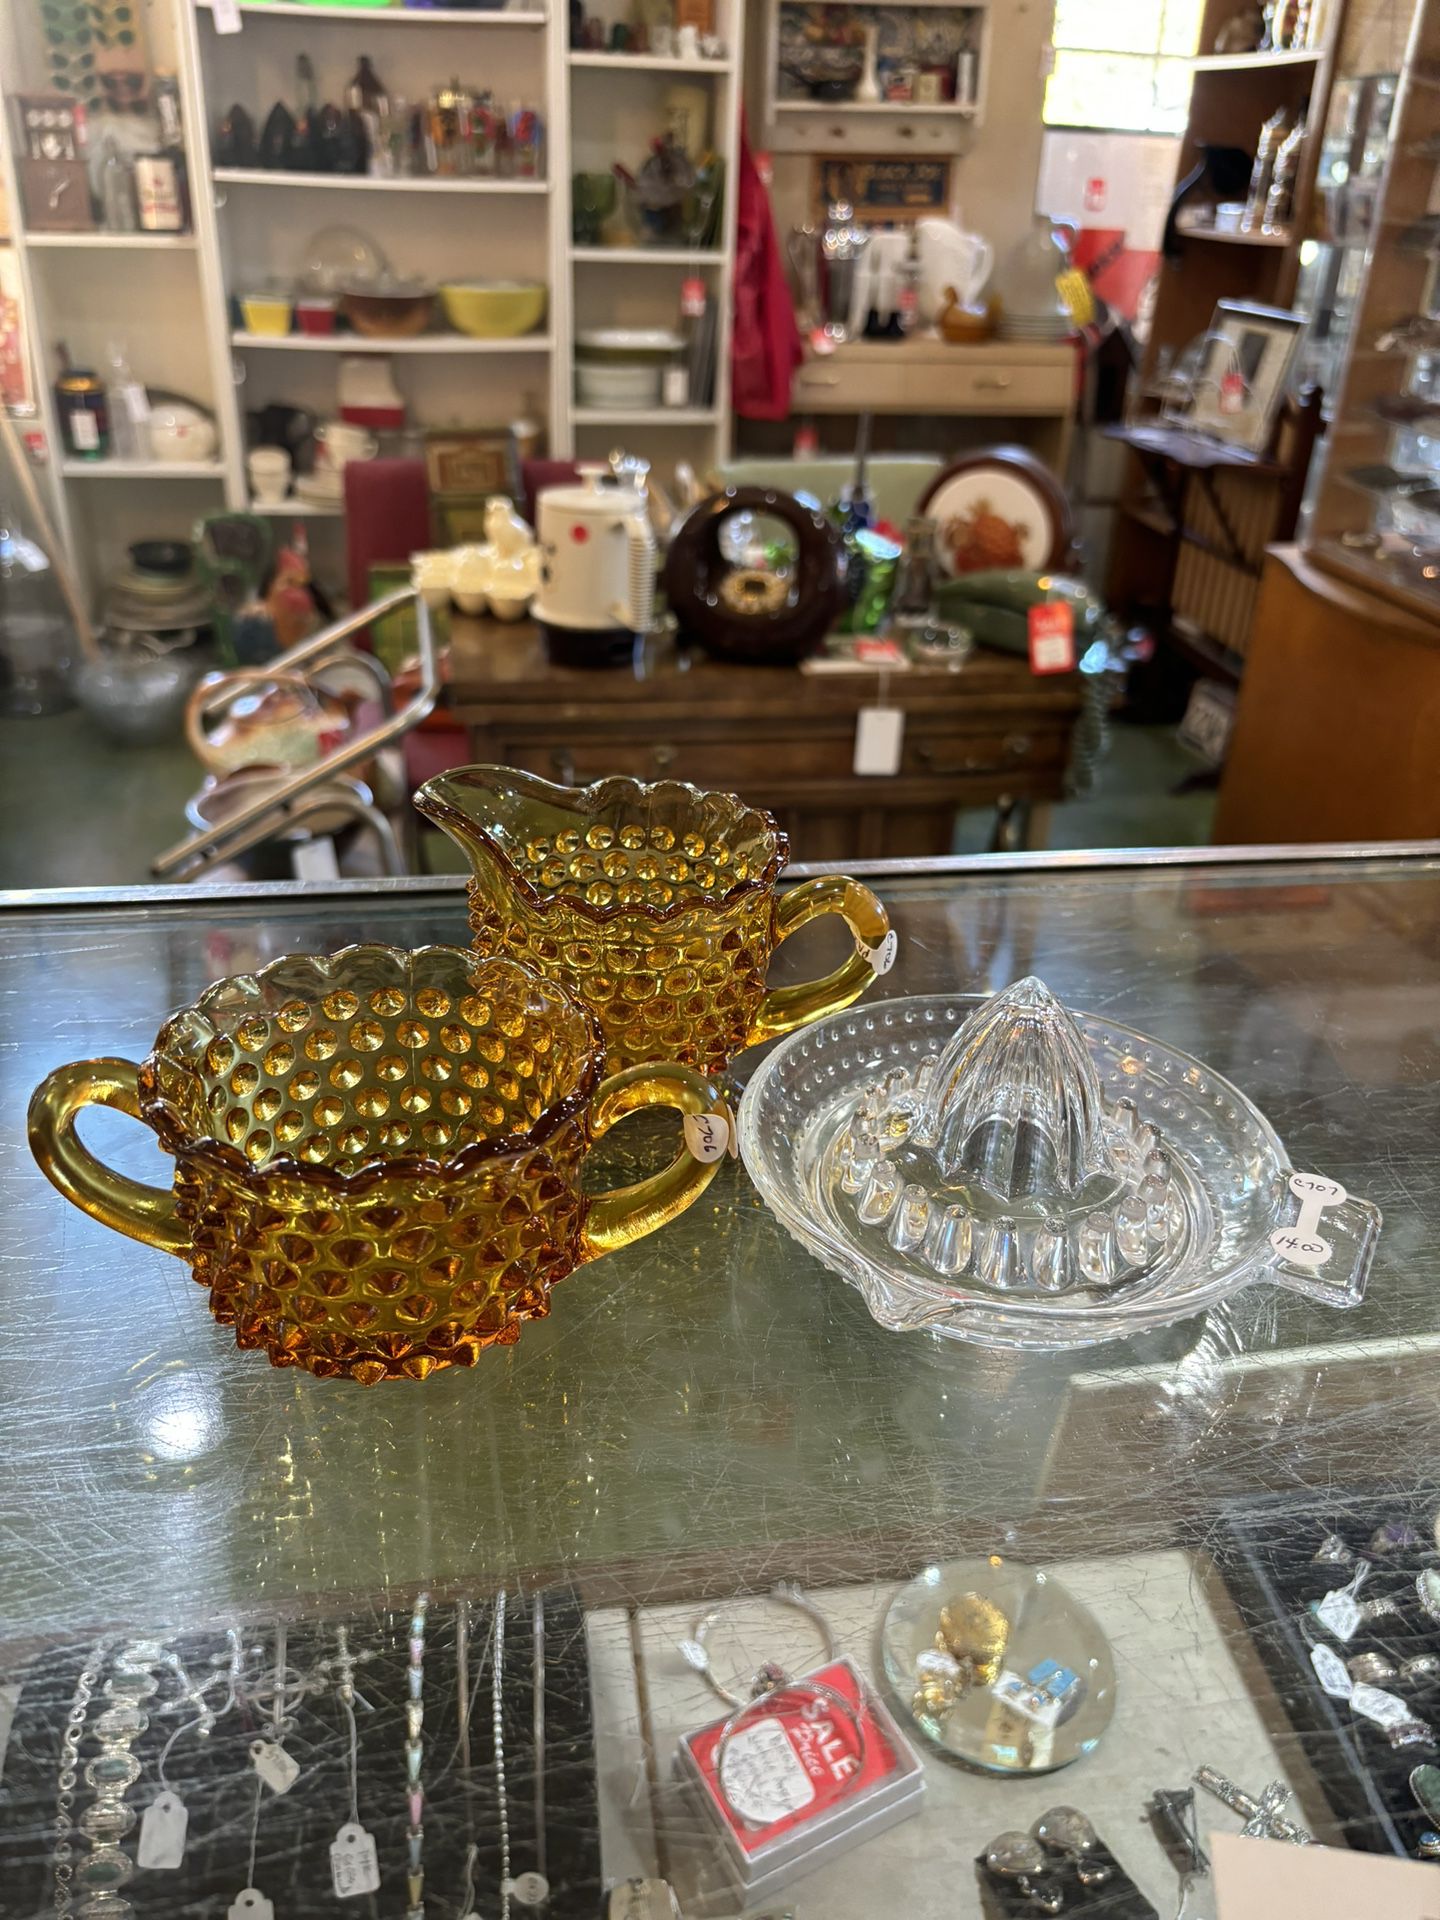 7x3 amber hobnail cream and sugar 18.00. 6.5 Hobnail glass juicer 14.00.  Johanna at Antiques and More. Located at 316b Main Street Buda. Antiques vin